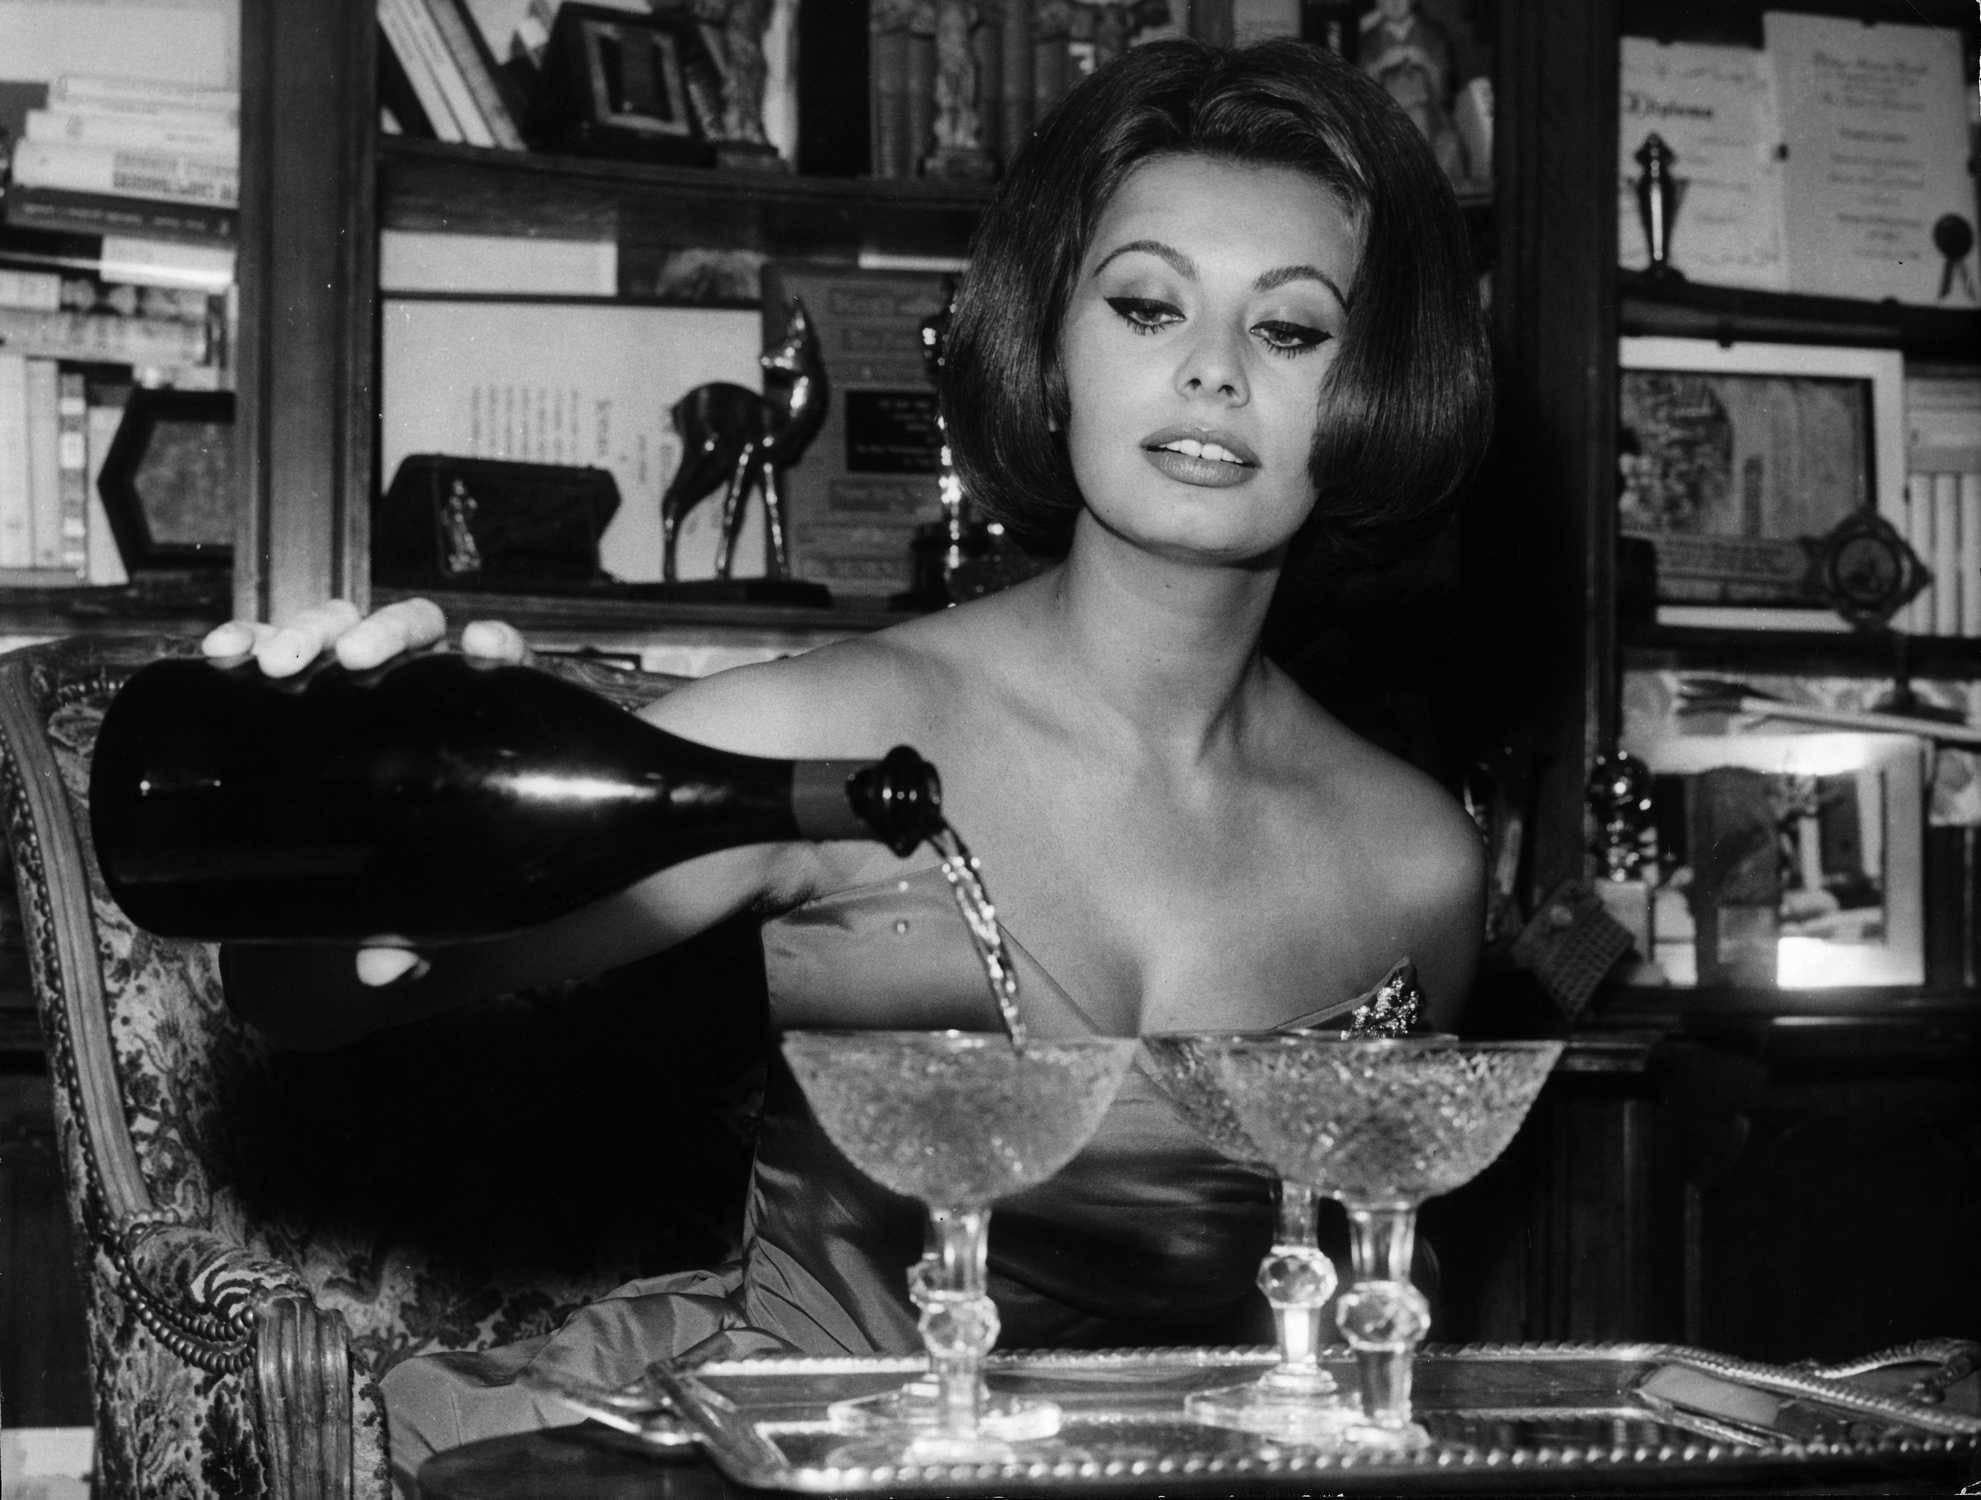 Unknown Portrait Photograph - Sophia Loren Pouring Champagne on New Year's Eve Fine Art Print